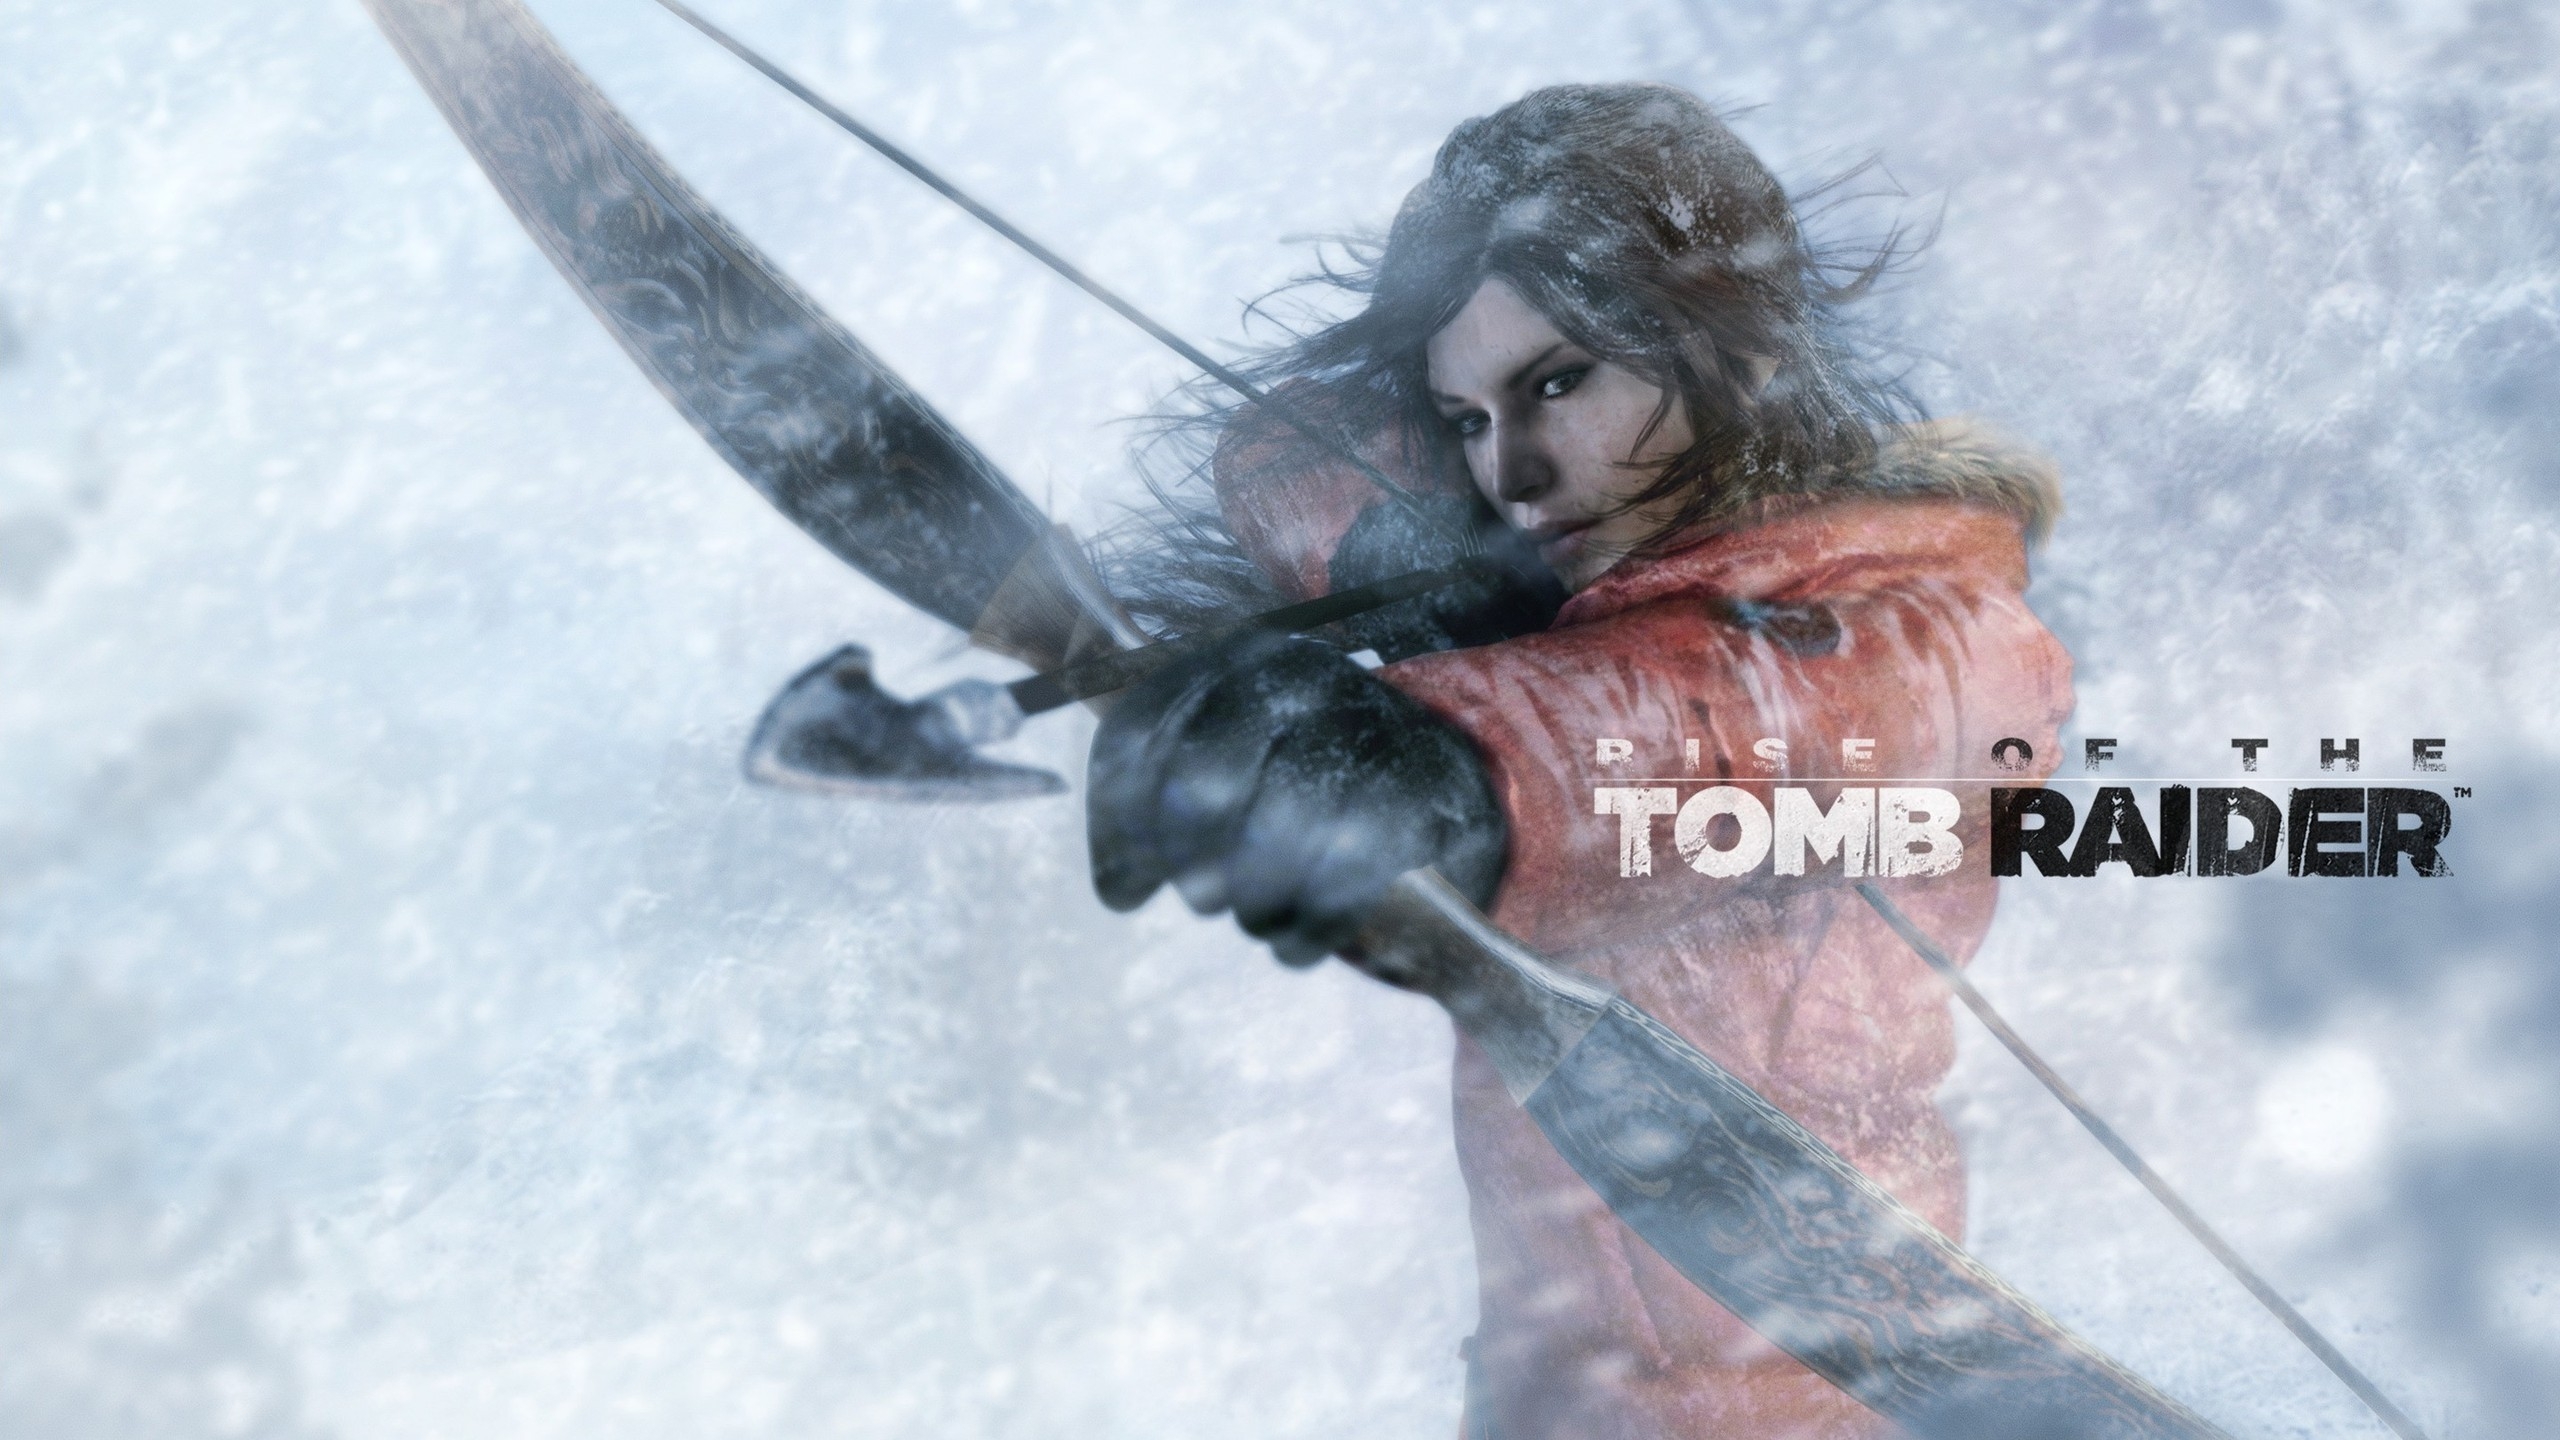 Lara Croft Rise of The Tomb Raider Bow and Arrow for 2560x1440 HDTV resolution